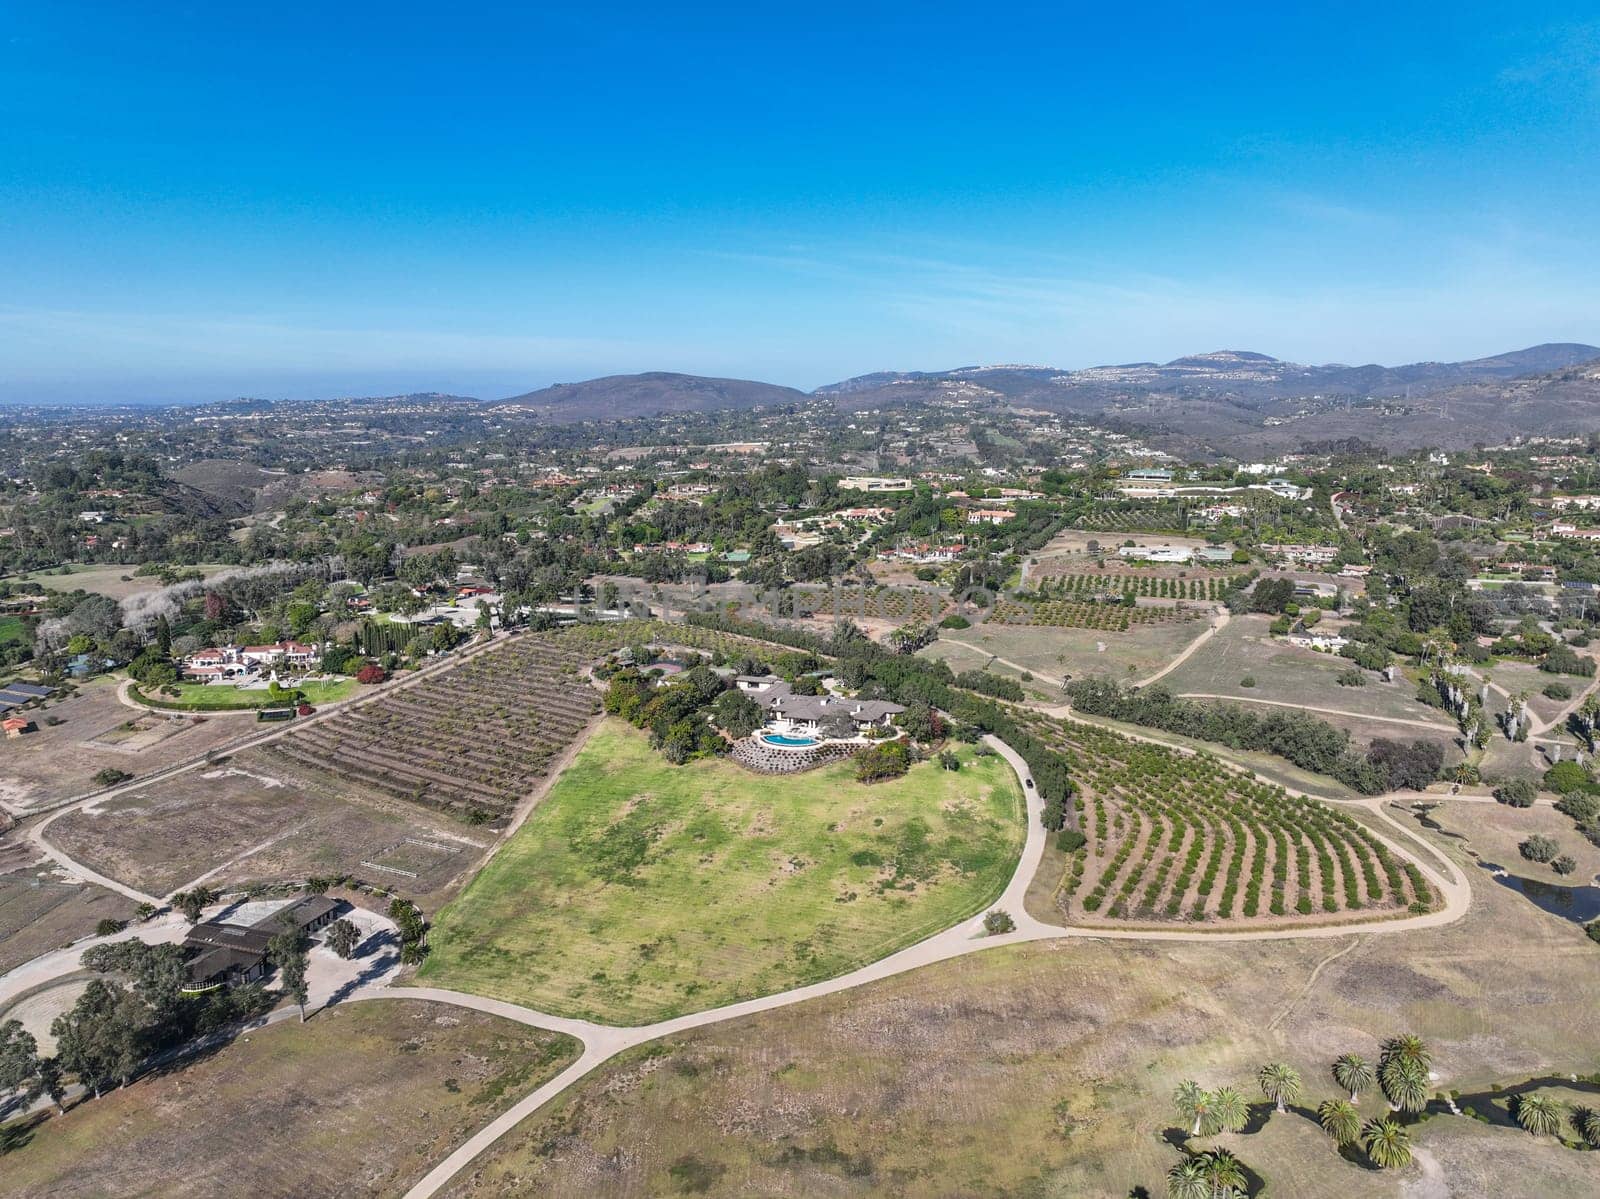 Aerial view over Rancho Santa Fe super wealthy town in San Diego, California, USA